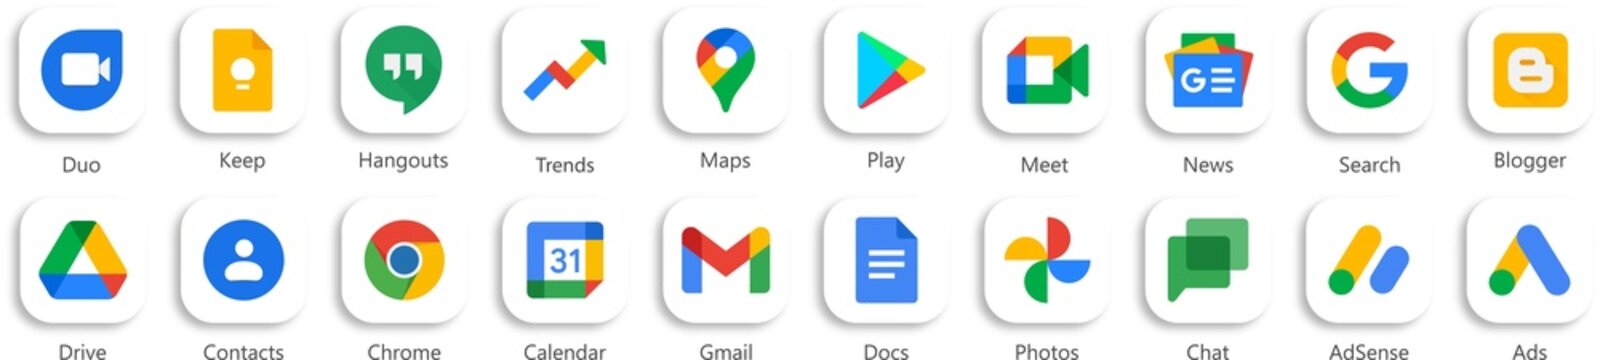 Google icons set. Google product icon on transparent background with realistic shadow. Google, Gmail, Google Pay, Calendar, Duo, Keep, Hangouts, Trends, Maps, Play, Appointments, News, Search. PNG ima